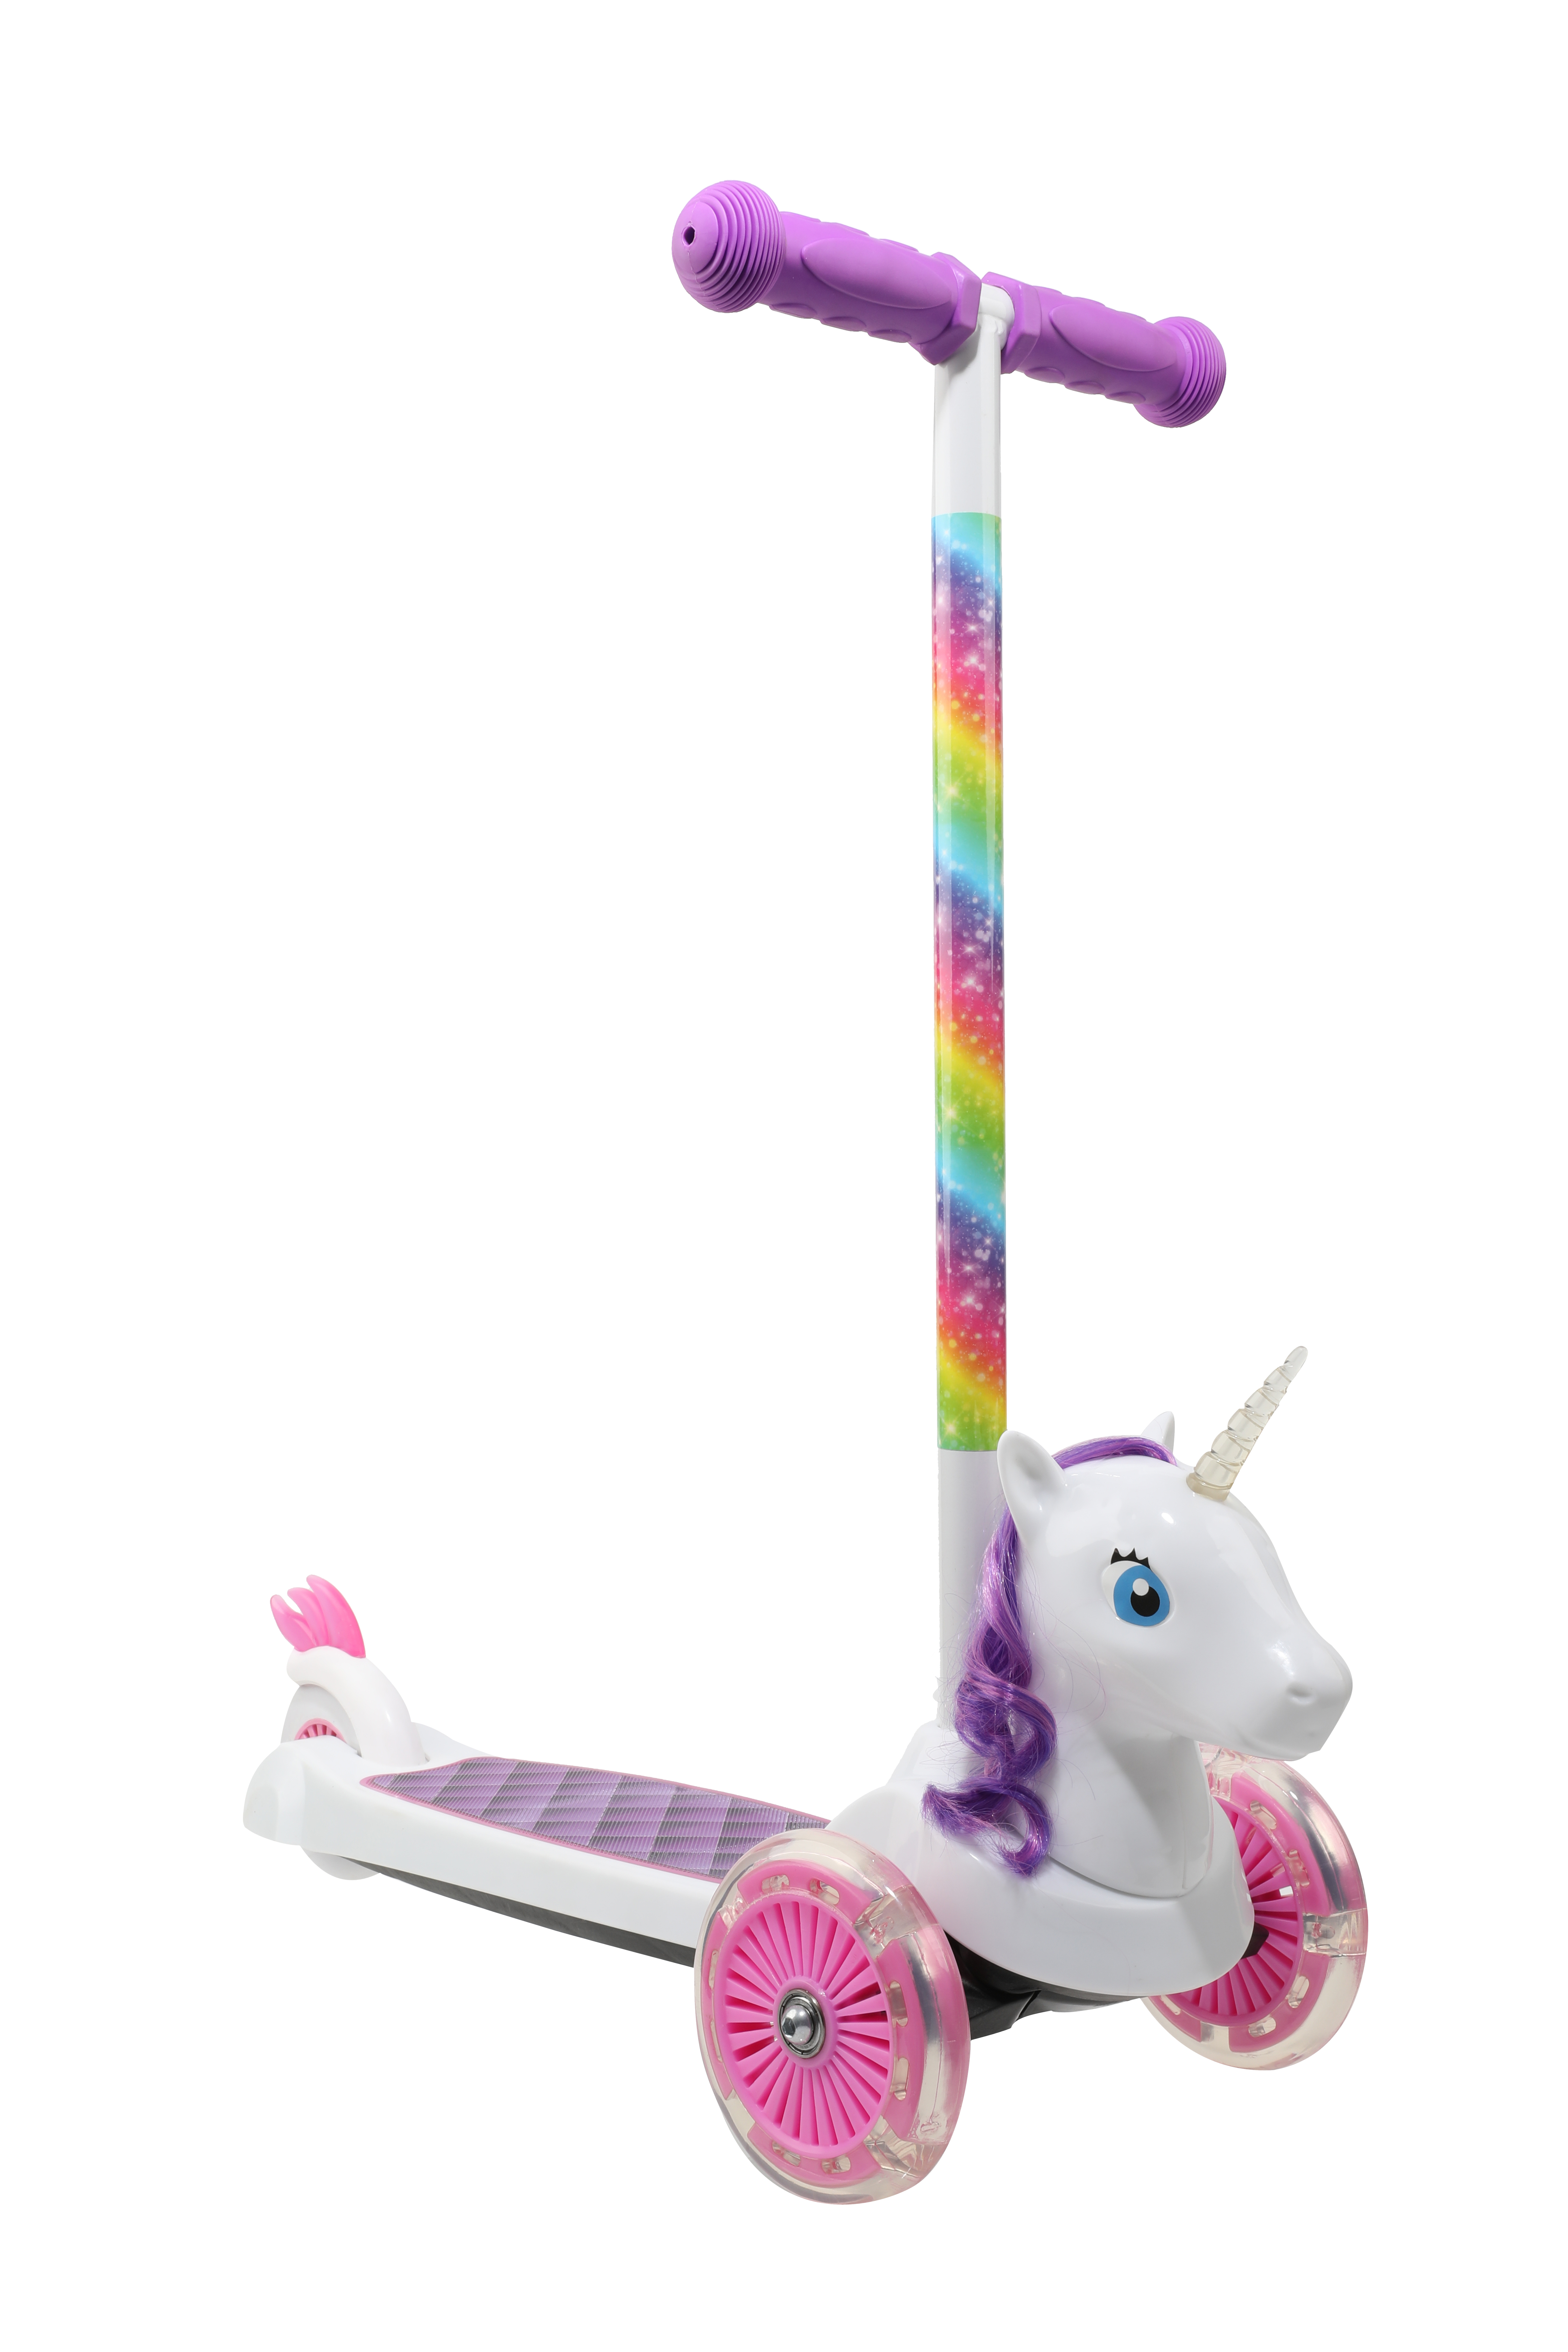 Dimensions Unicorn 3D Scooter with Light Up Wheels, Ages 3+, Max Weight 75lbs, Tilt and Turn Steering, 3-wheel Platform, Foot-Activated Brakes - image 1 of 12